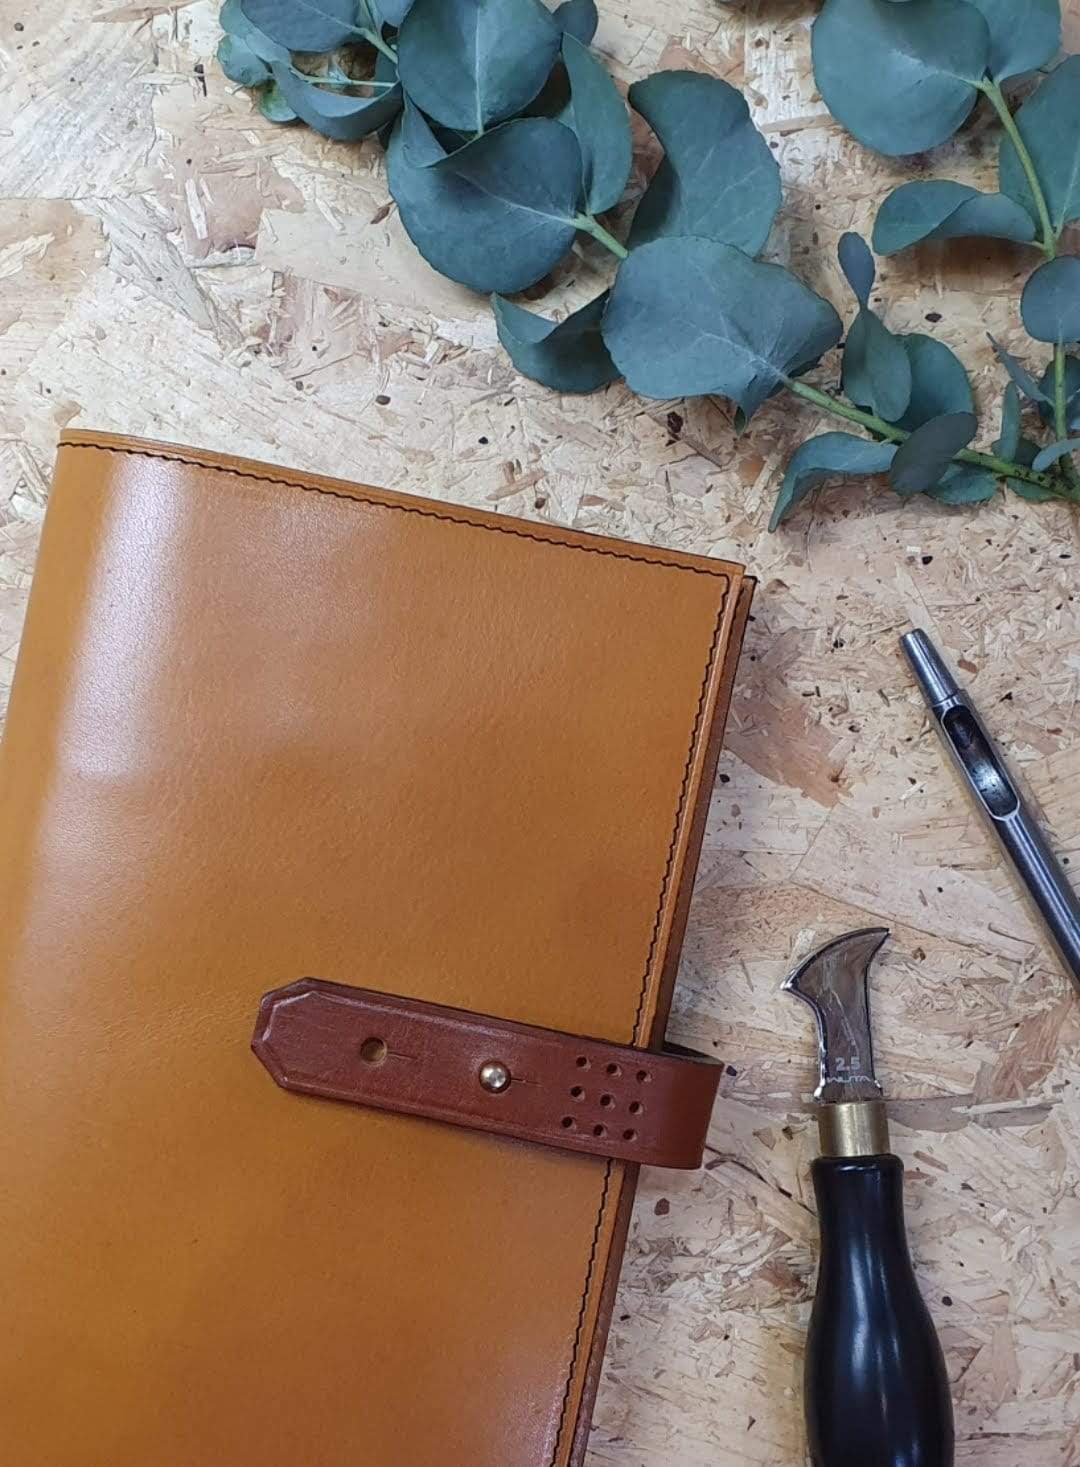 Hands of Tym stationery 'Laurel' The Bespoke Handmade Luxury Leather Notebook / Diary A5 - Slim